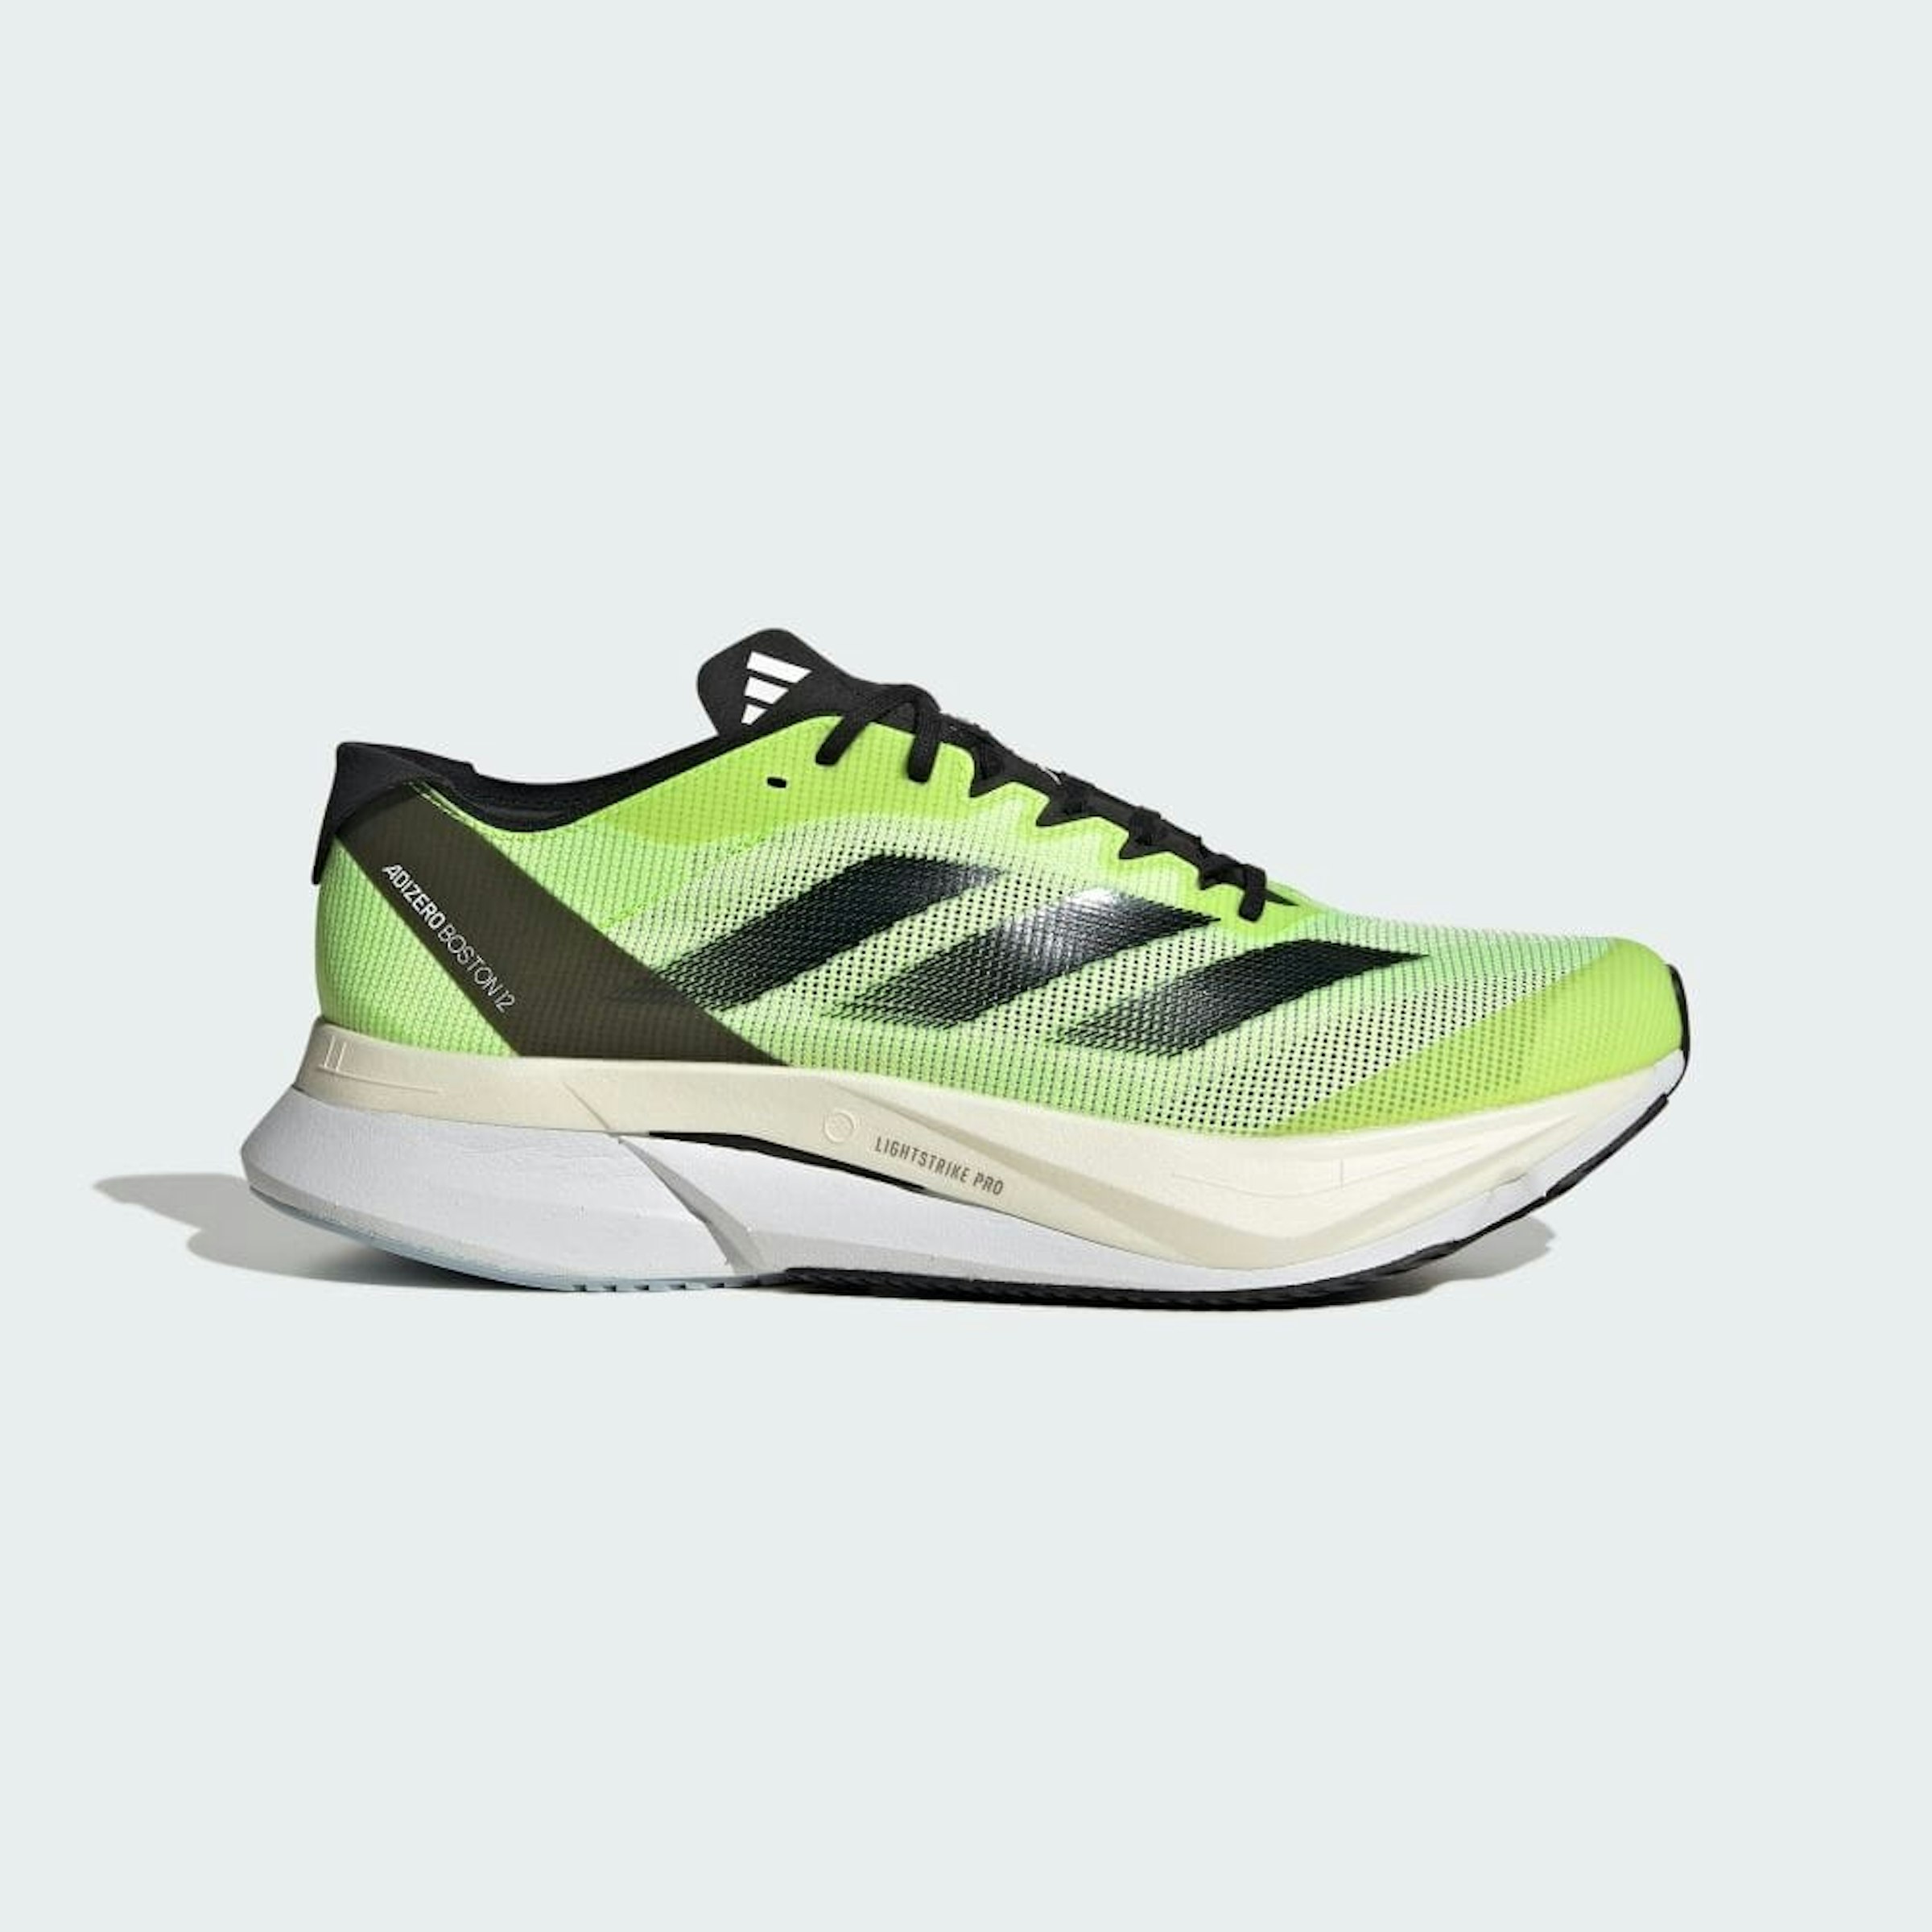 The upper has been renewed, and the material of the midsole has also changed. Adizero Boston 12. 18,700 yen (tax included)